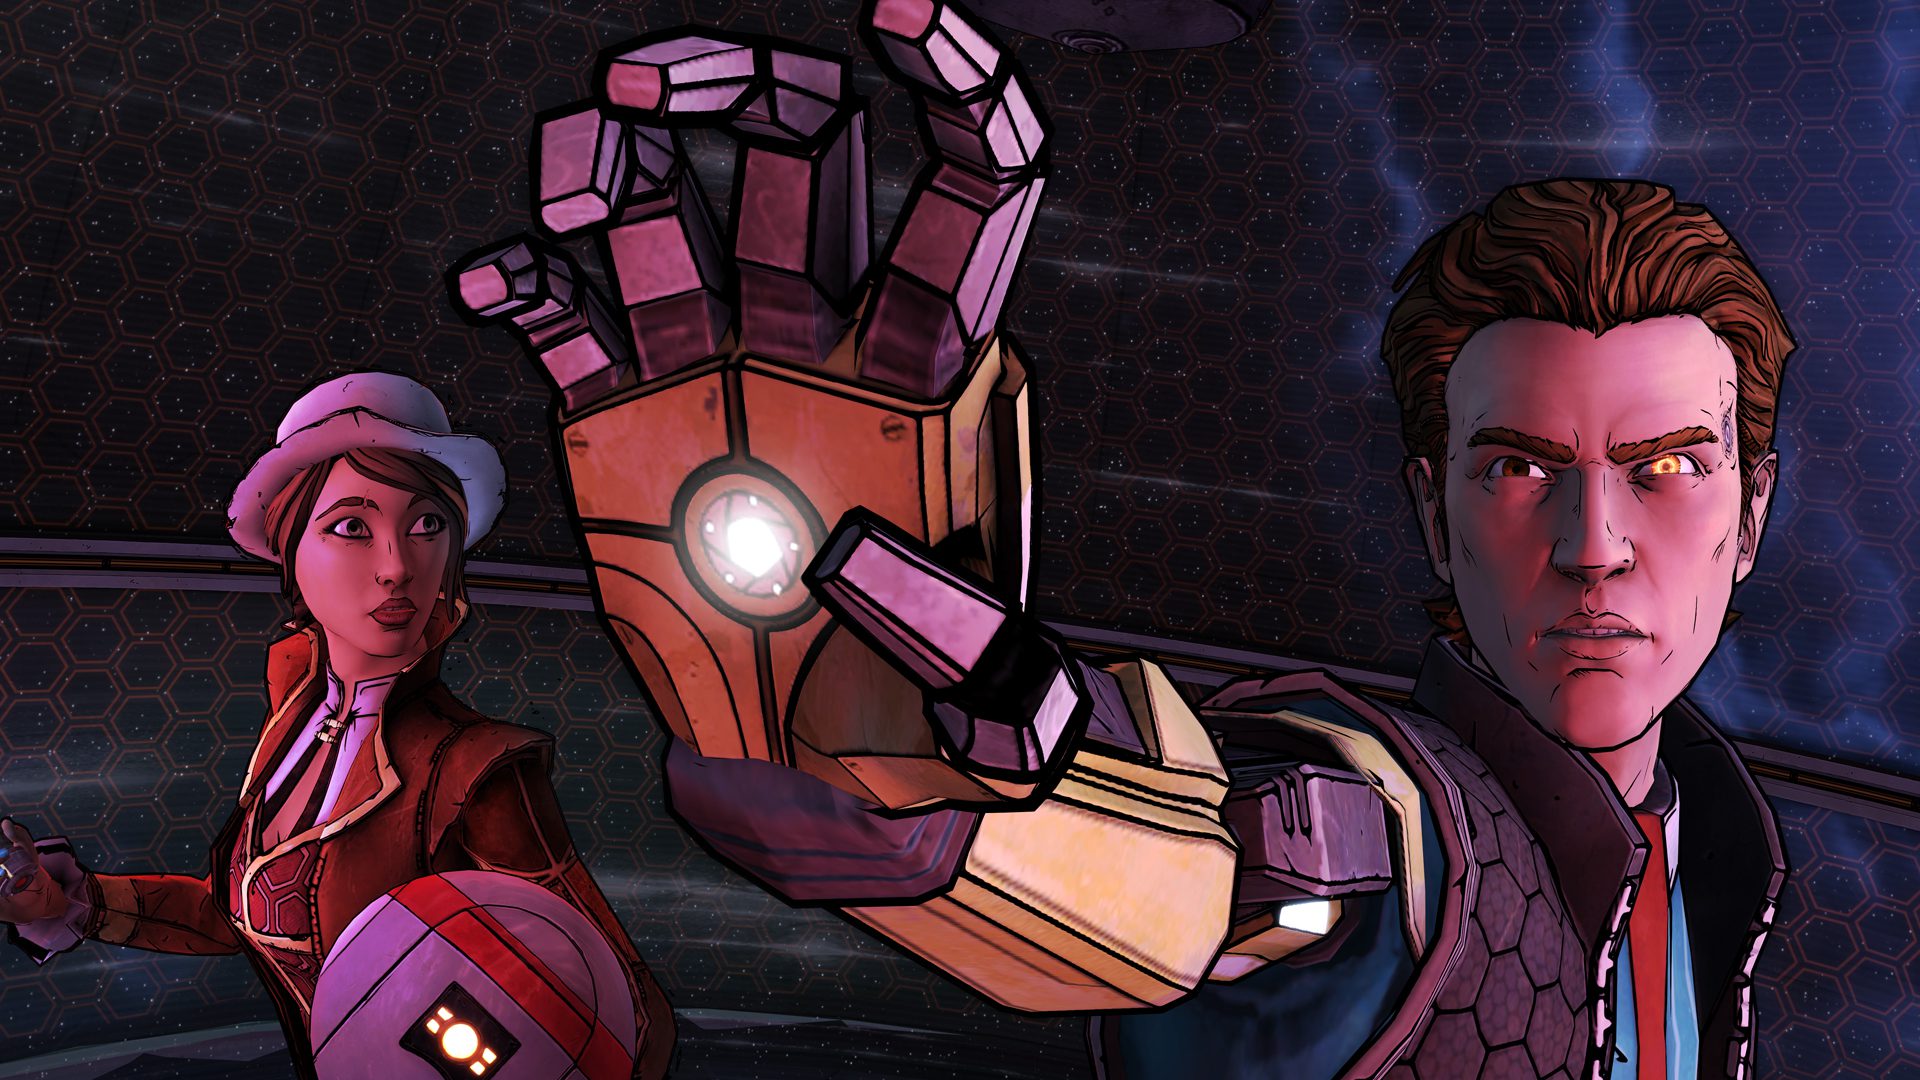 where can i buy tales from the borderlands